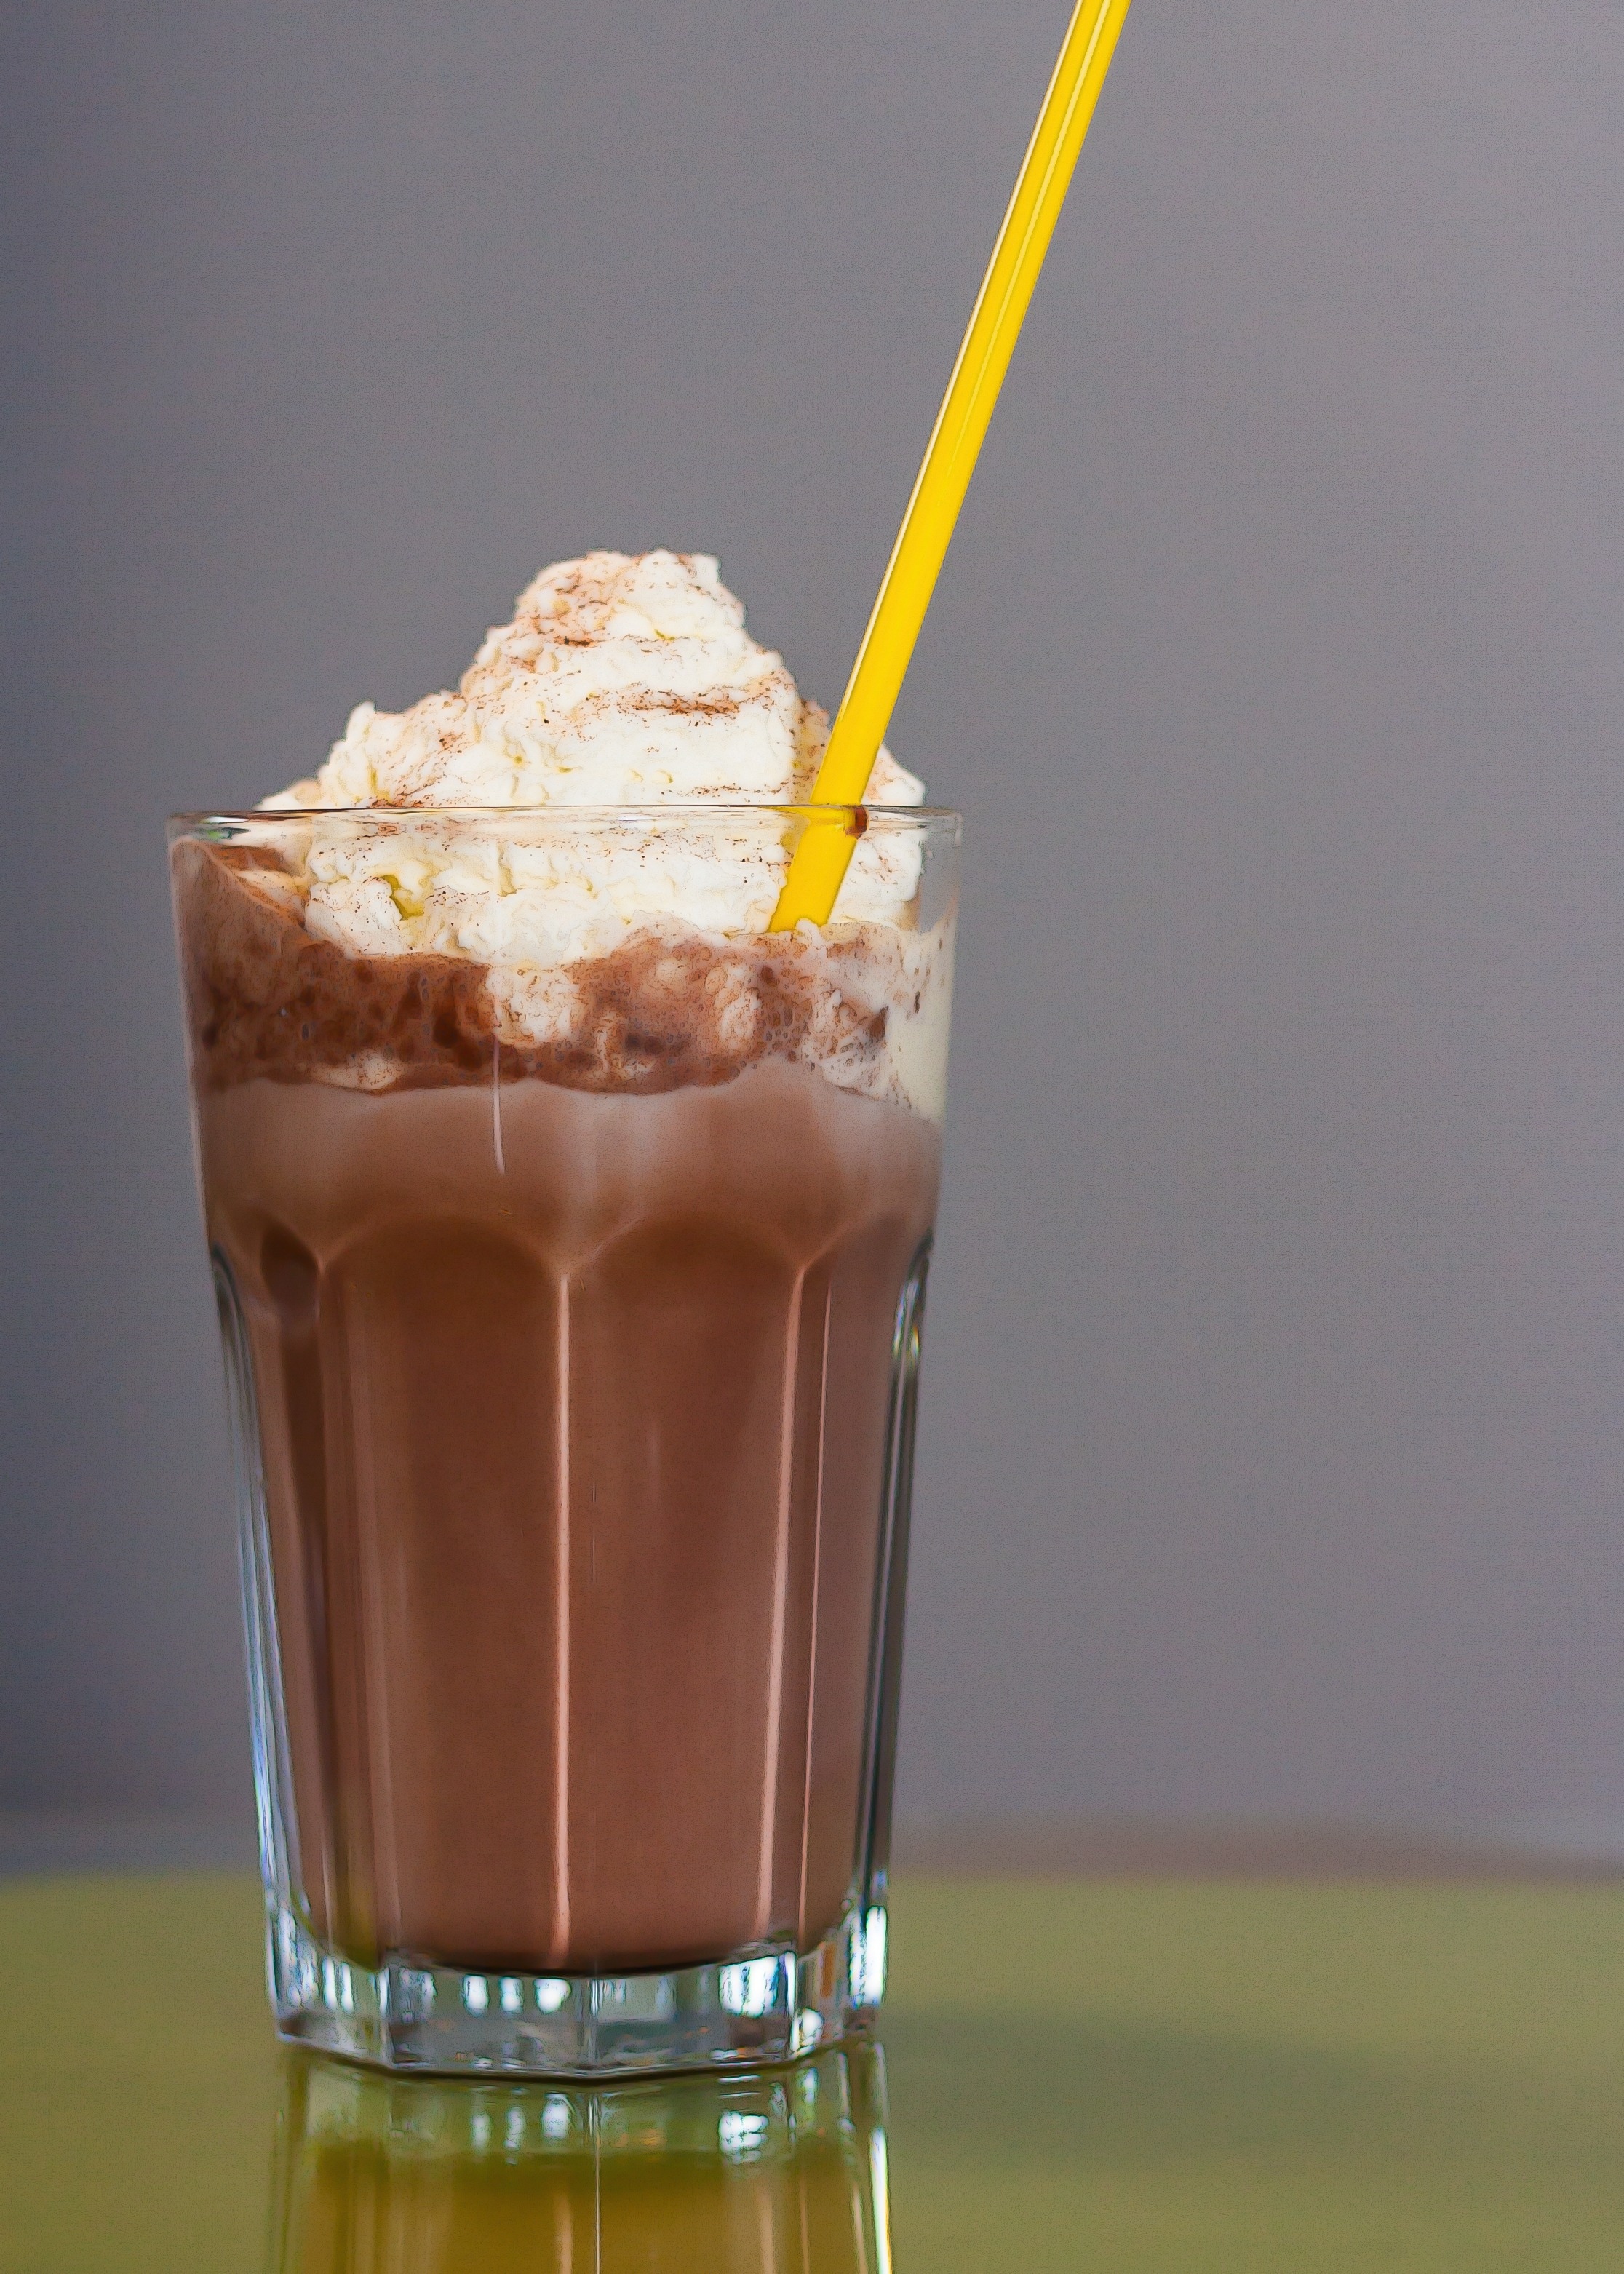 Ice Chocolate, Drink, Cafe, Cream Cover, drink, drinking glass